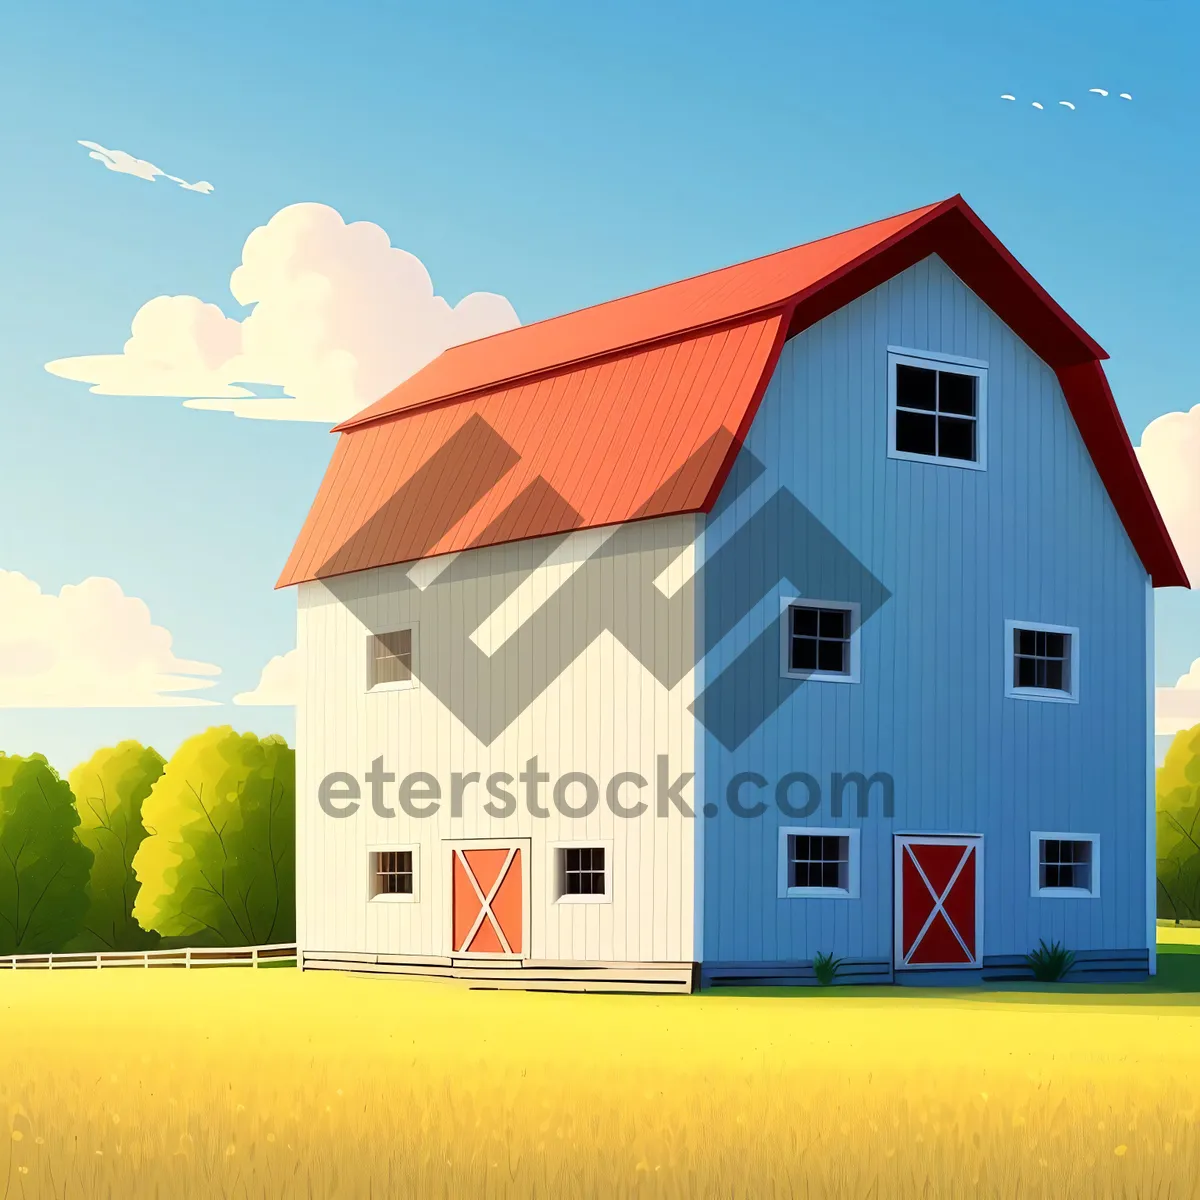 Picture of Residential Home for Sale with Charming Architecture and Barn